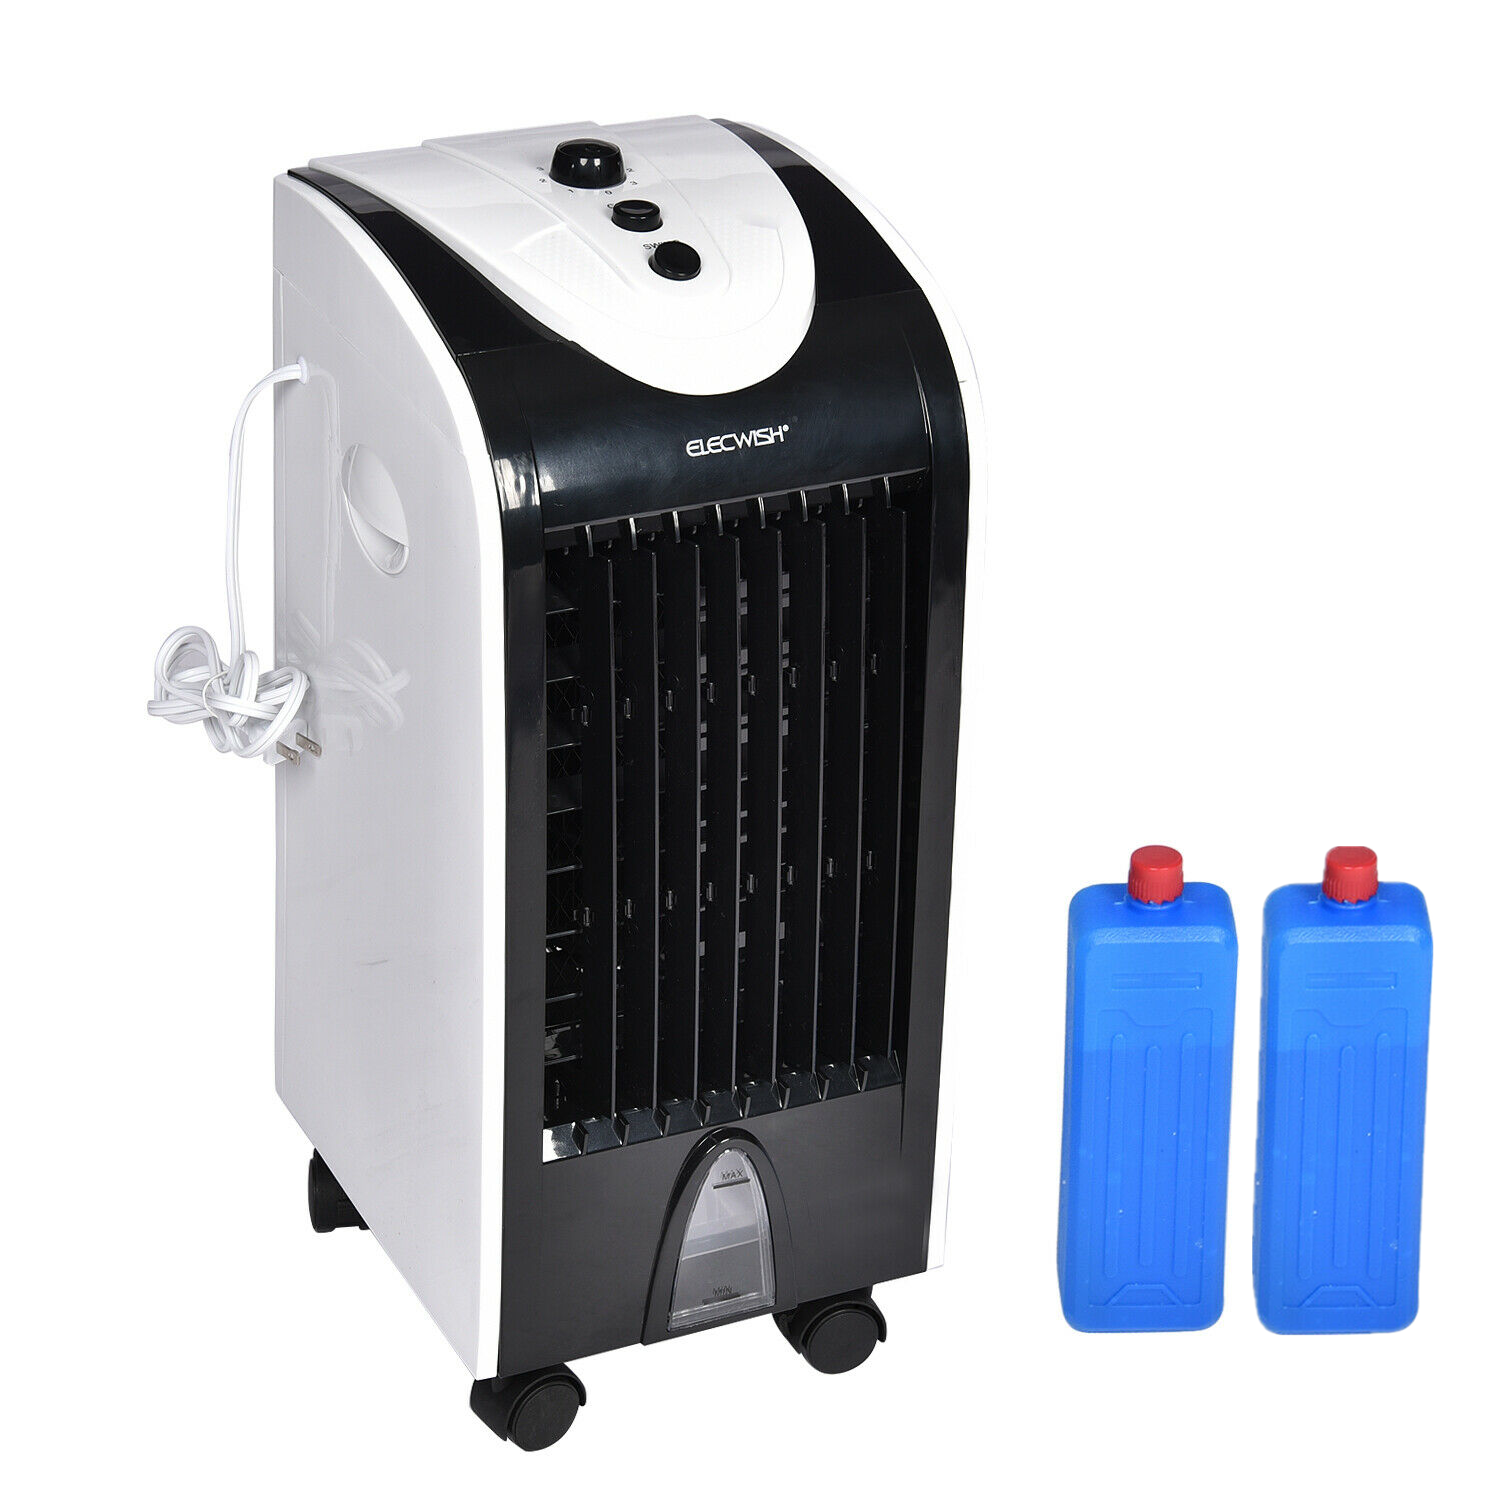 Portable Cooler Mini Air Conditioner Fan Evaporative Humidifier 3 Speed Cooling